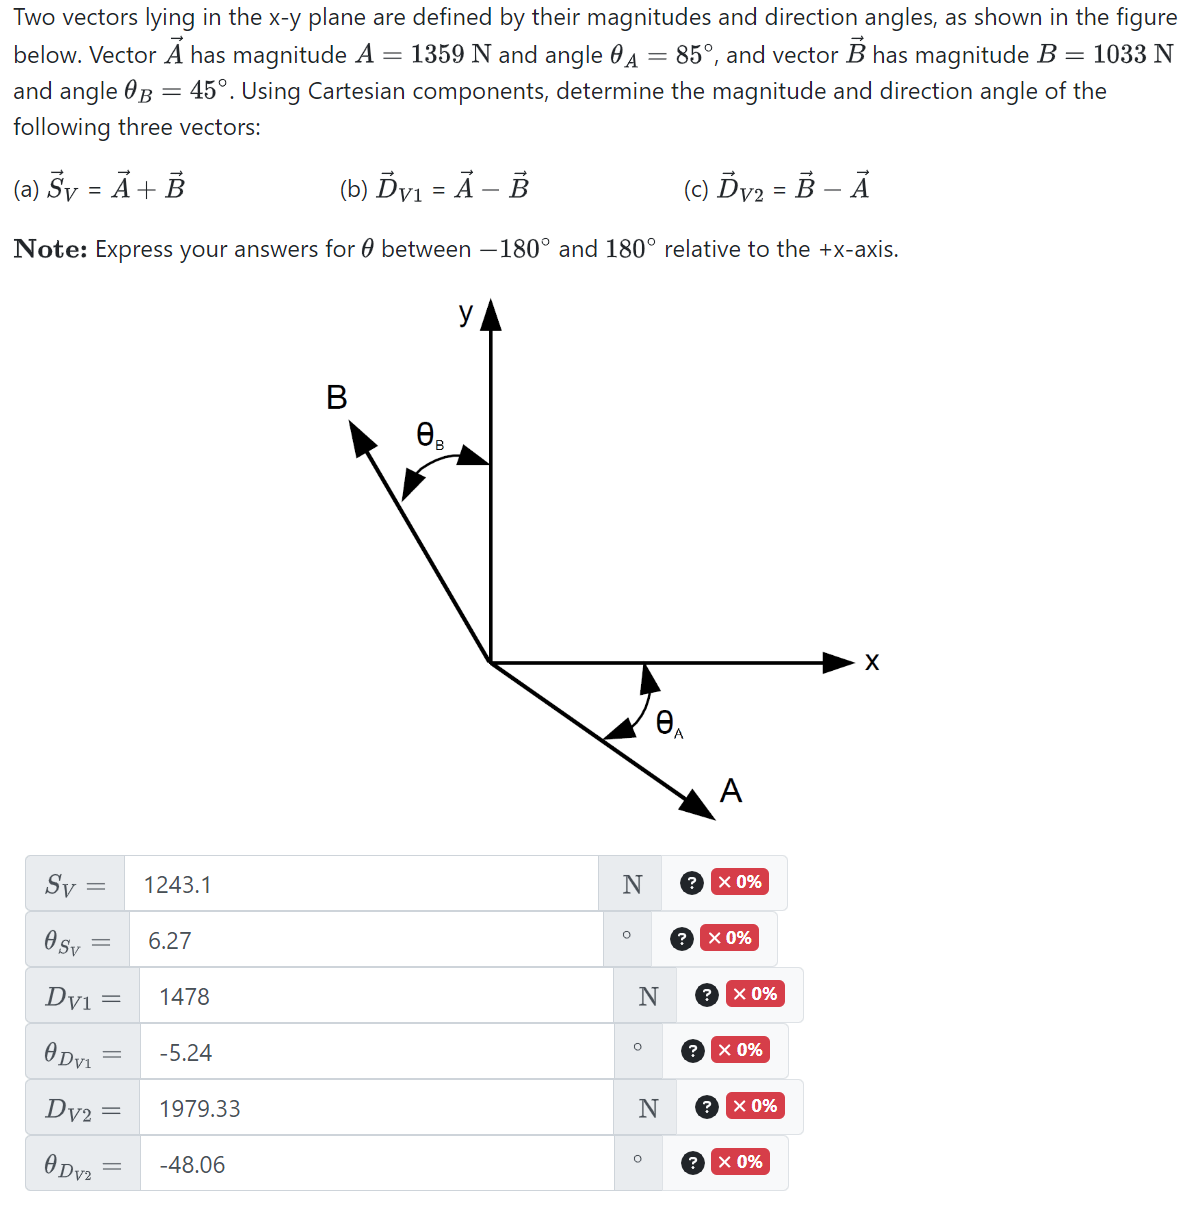 below. Vector A has magnitude A
=
Two vectors lying in the x-y plane are defined by their magnitudes and direction angles, as shown in the figure
1359 N and angle A = 85°, and vector B has magnitude B = 1033 N
and angle B = 45°. Using Cartesian components, determine the magnitude and direction angle of the
following three vectors:
(a) Sy = A + B
(b) Ďv₁ = A - B
(c) Ďv₂ = B - A
Note: Express your answers for between 180° and 180° relative to the +x-axis.
Sv
0 Sv
Dv₁
||
-
Dv₁
Dv2
DV²
=
1243.1
6.27
1478
-5.24
1979.33
-48.06
0₁
y
N
O
N
O
0₁
N
O
A
? X 0%
? X 0%
? X 0%
? x 0%
X 0%
? x 0%
X